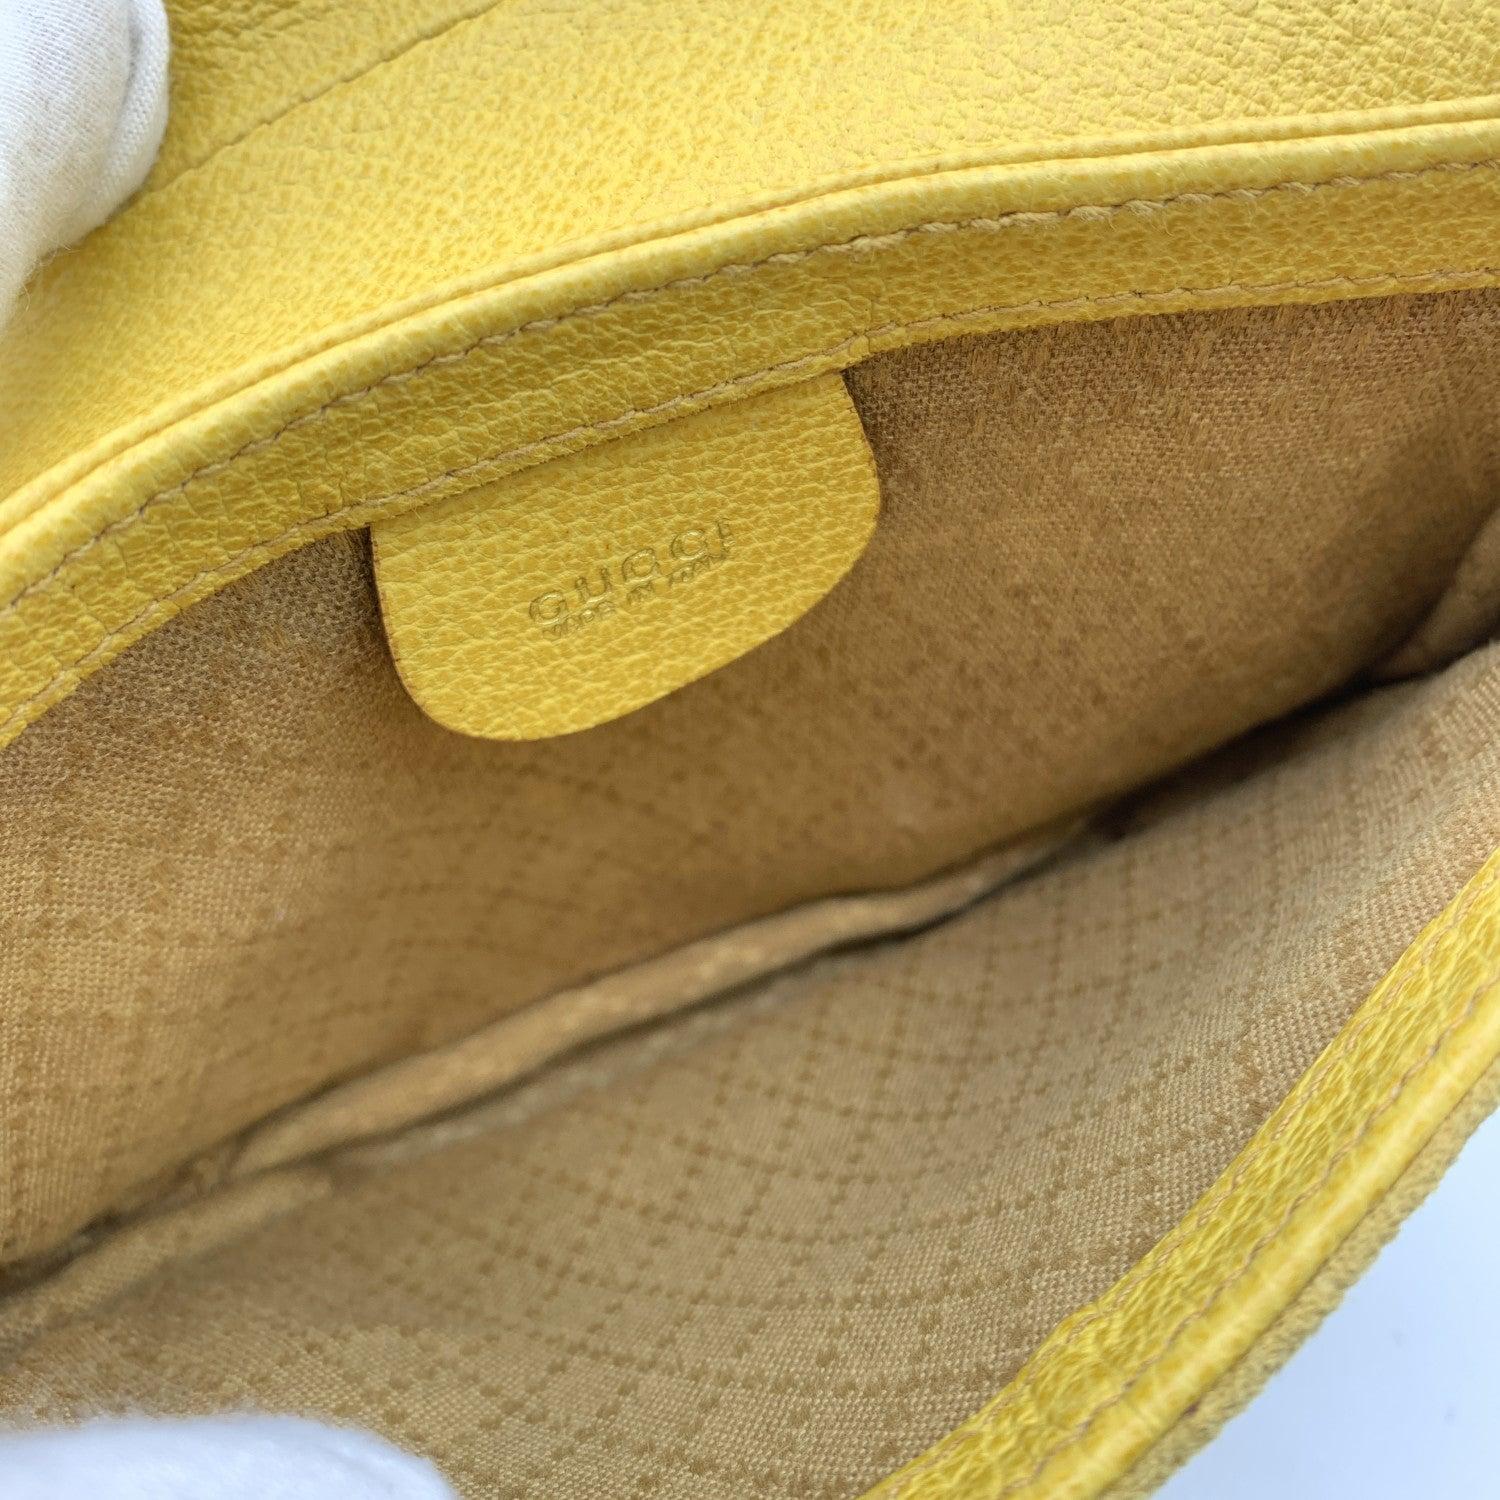 Women's Gucci Vintage Yellow Leather Suede Saddle Convertible Belt Bag